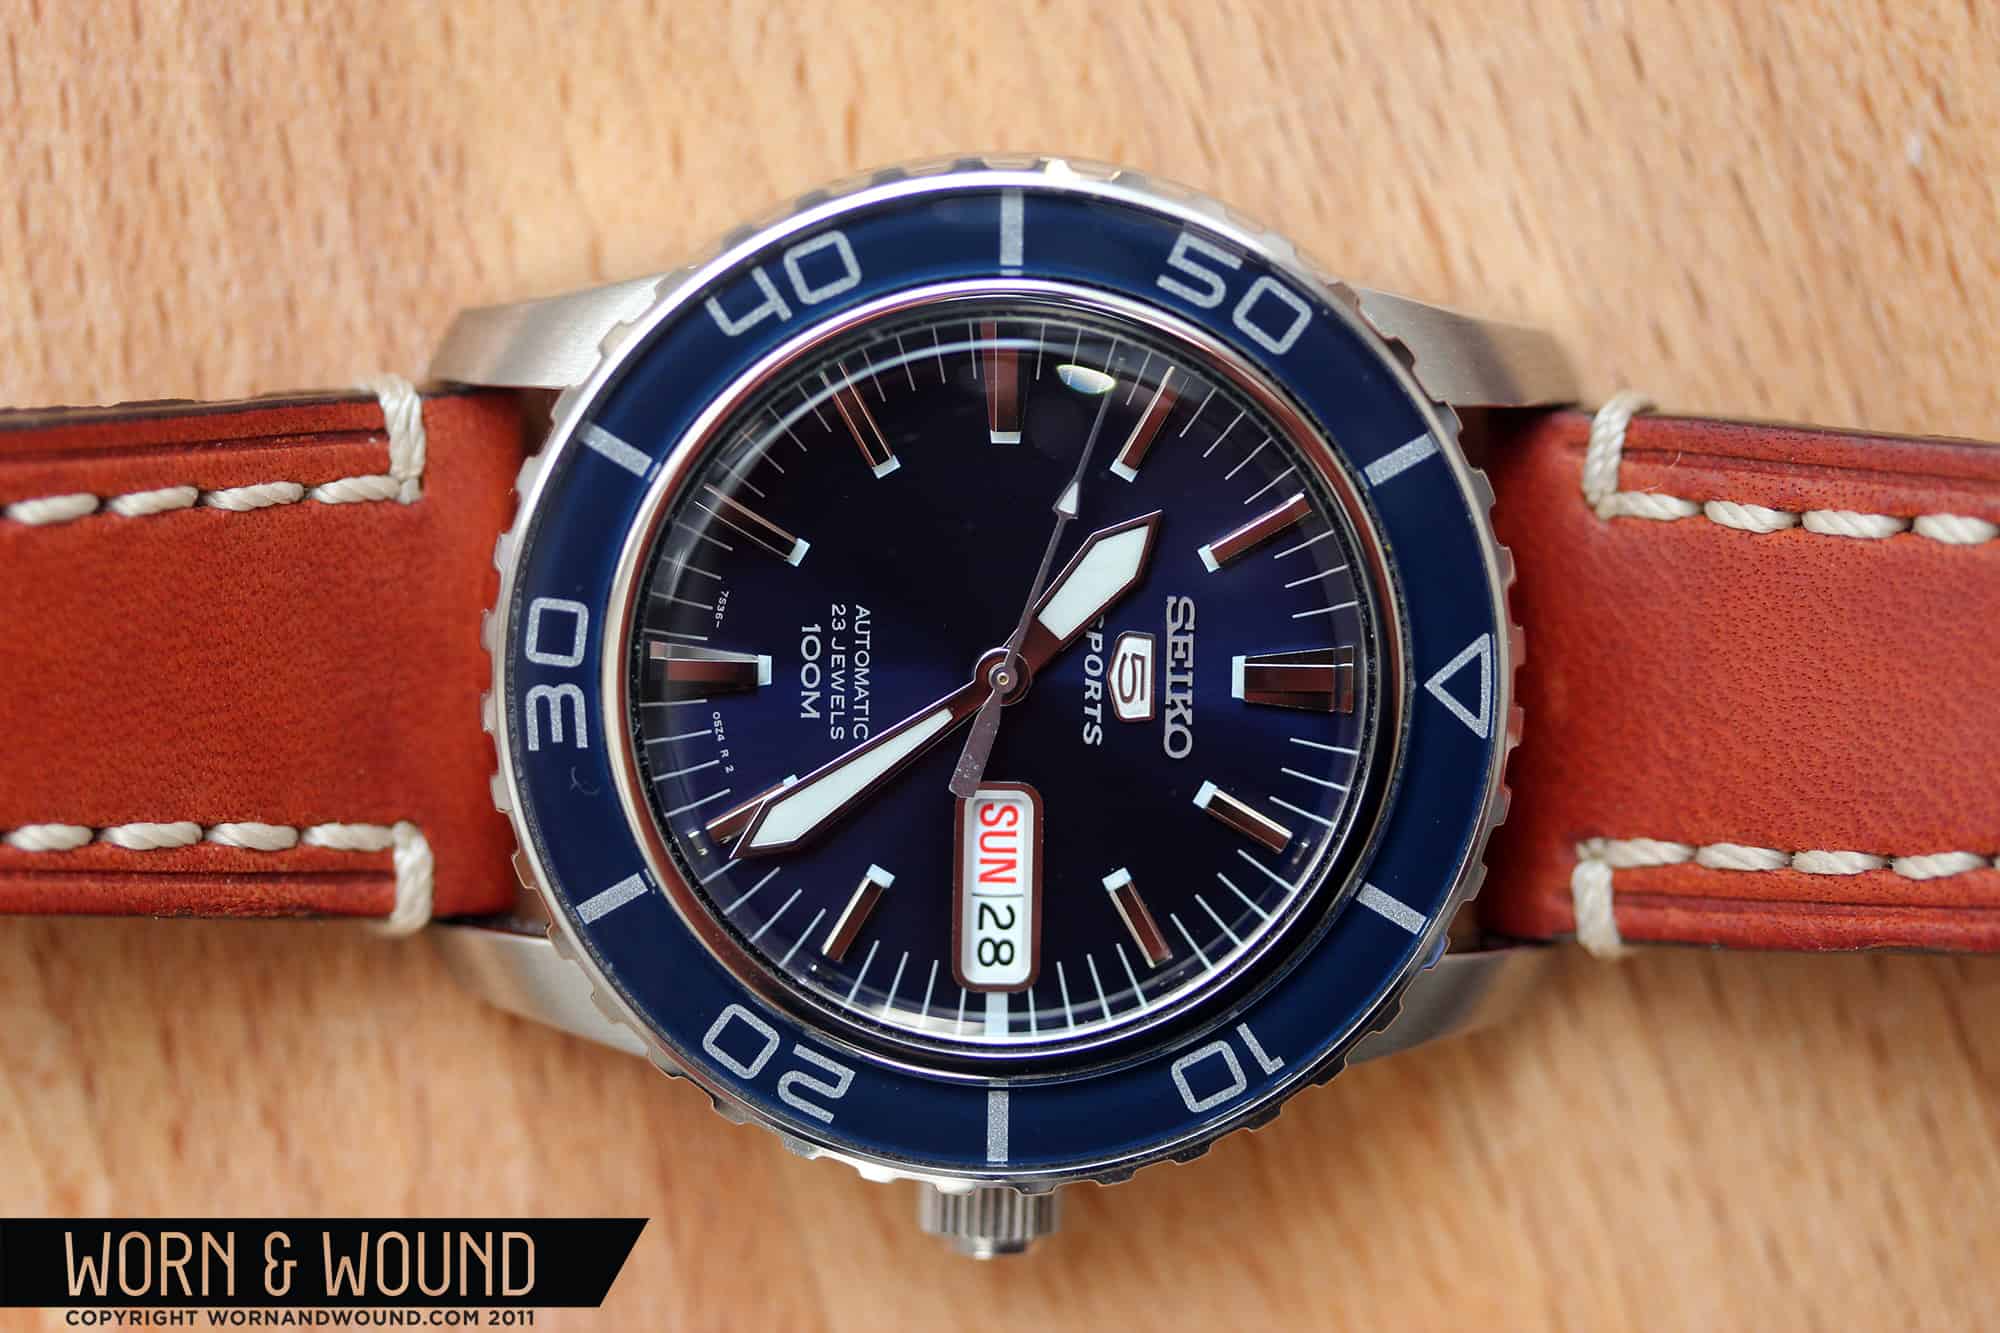 Review: Seiko 5 SNZH53 Diver in Blue - Worn & Wound